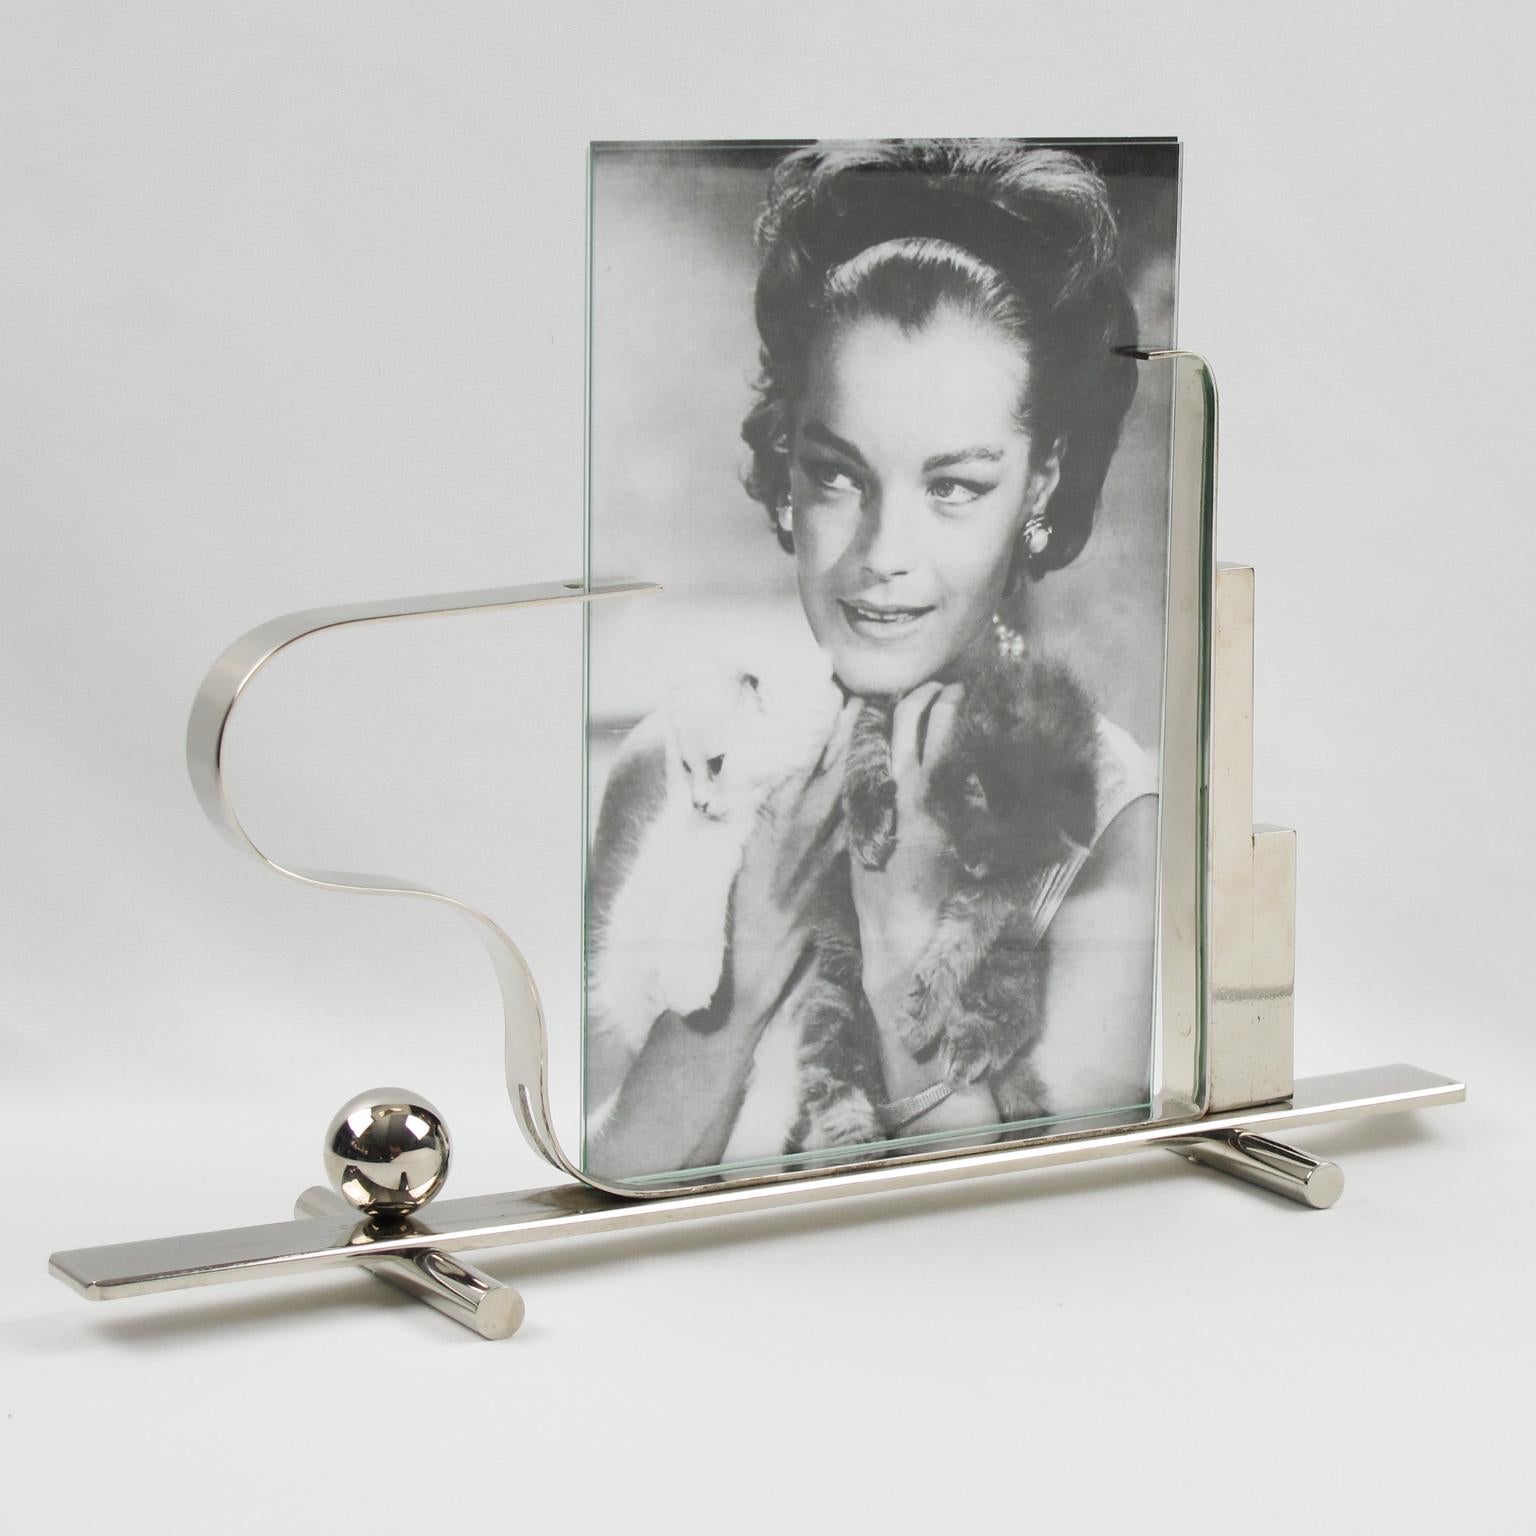 Sculptural French Art Deco chrome picture photo frame. Heavy chromed metal with skyscraper shape and asymmetric holders. Chromed metal plinth base with large rod feet compliment with chrome bead accent and geometric holders. The frame is complete